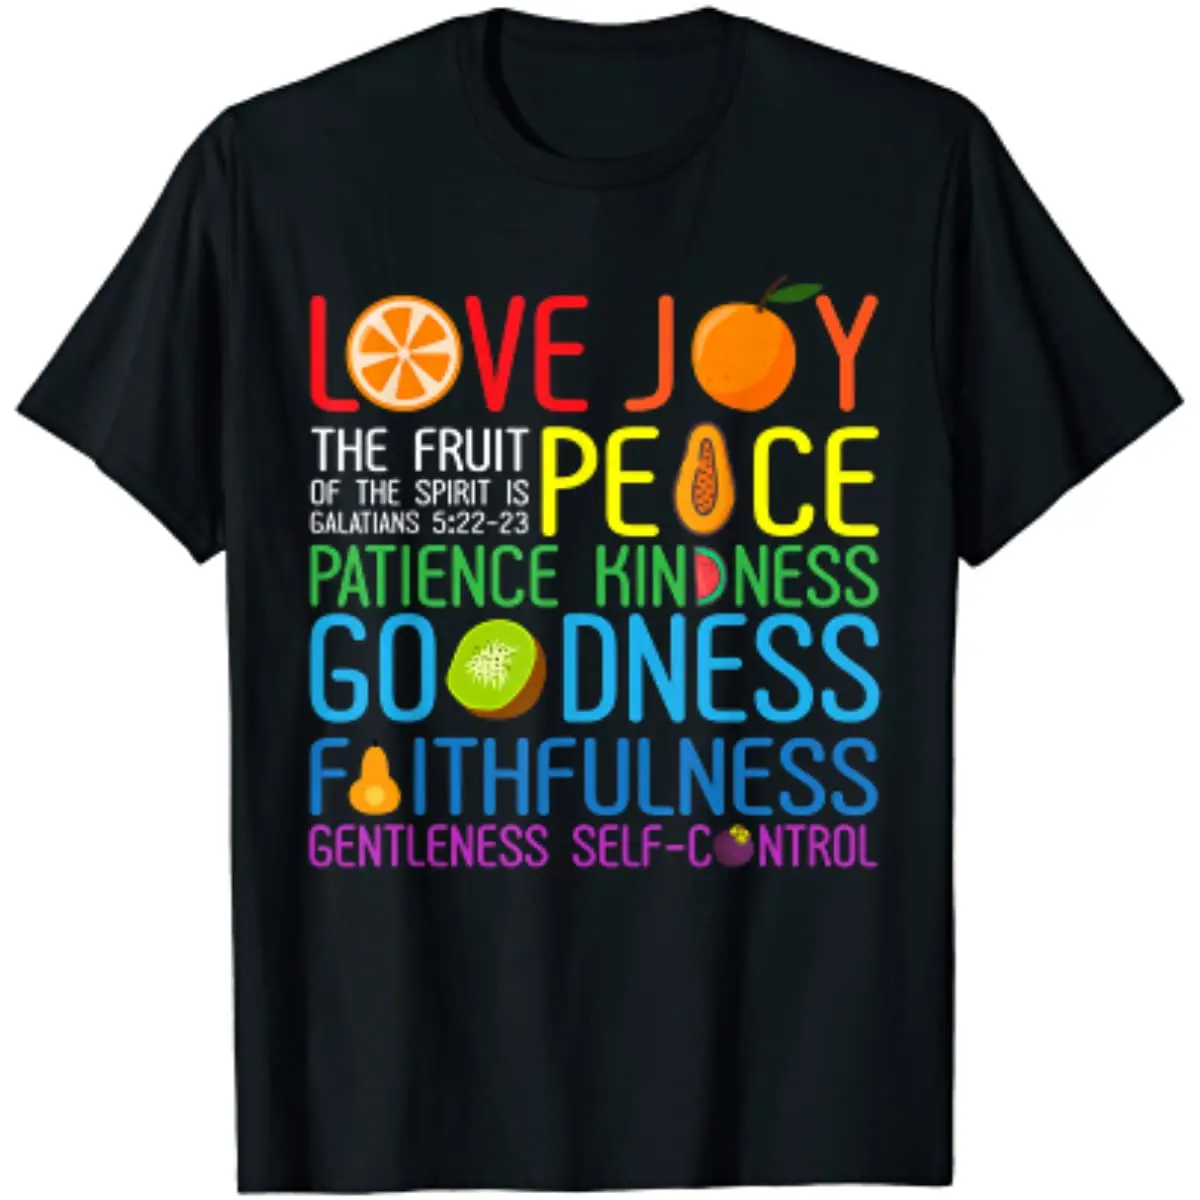 

Love Joy The Fruit of The Spirit Is Peace Patience Kindness T-Shirt Casual Cotton Daily Four Seasons Oversized T Shirt Tees